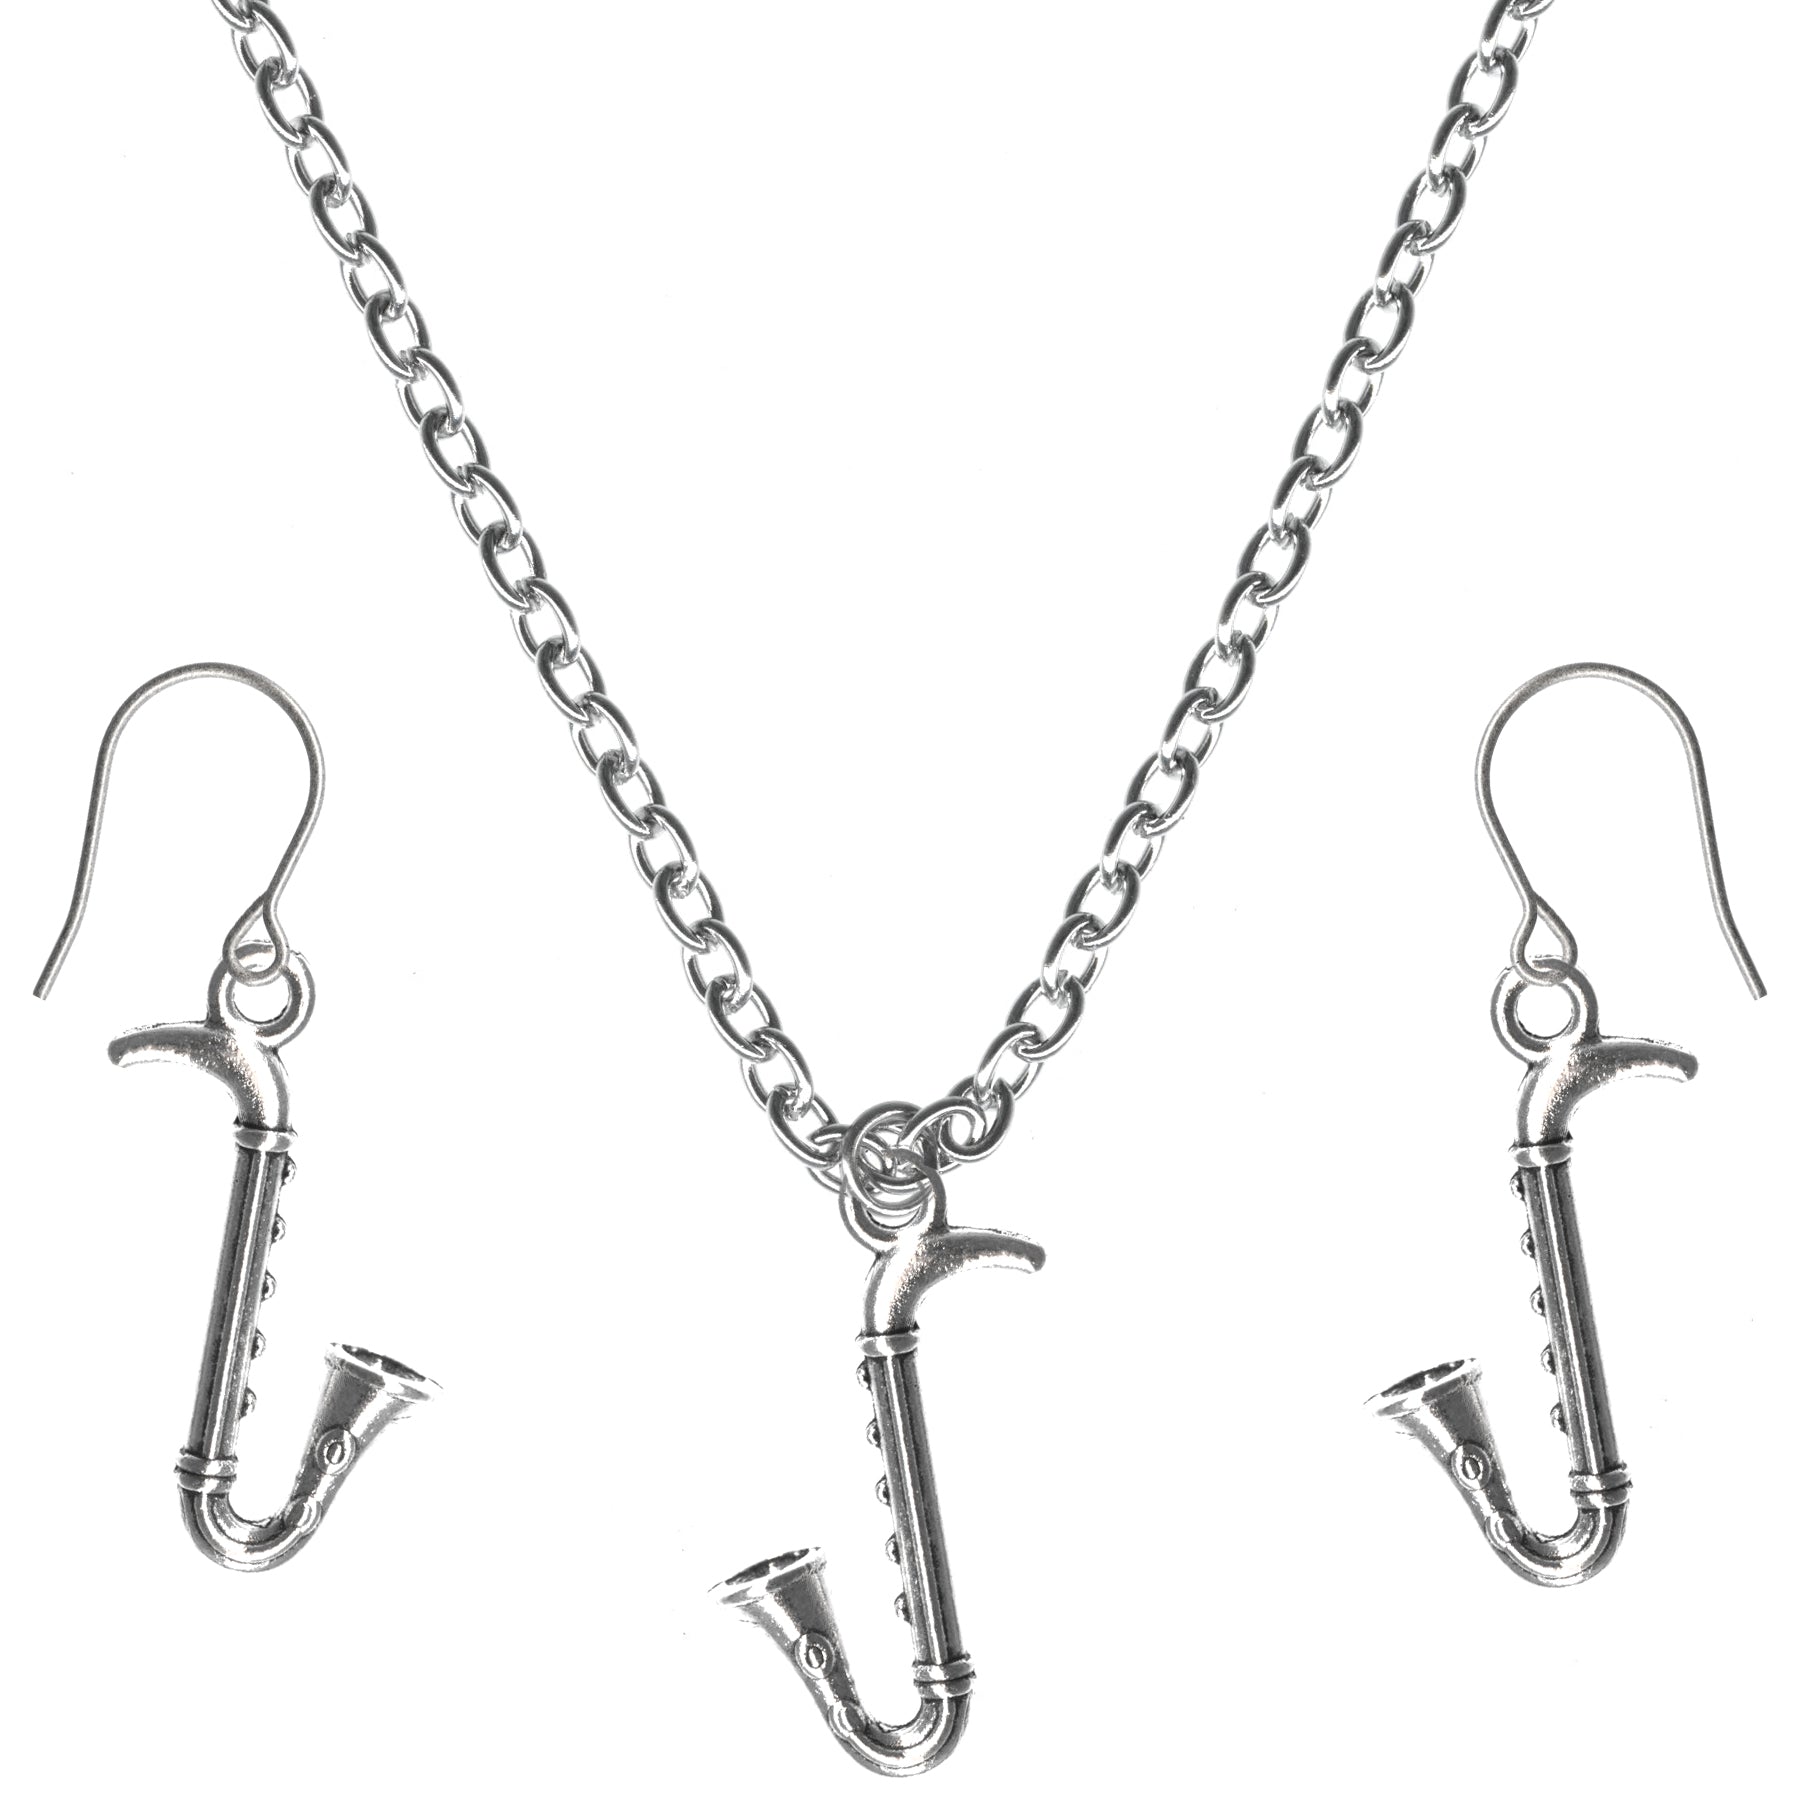 Saxophone Musical Instrument Charm Steel Chain Necklace and Hypoallergenic Titanium Earrings Set